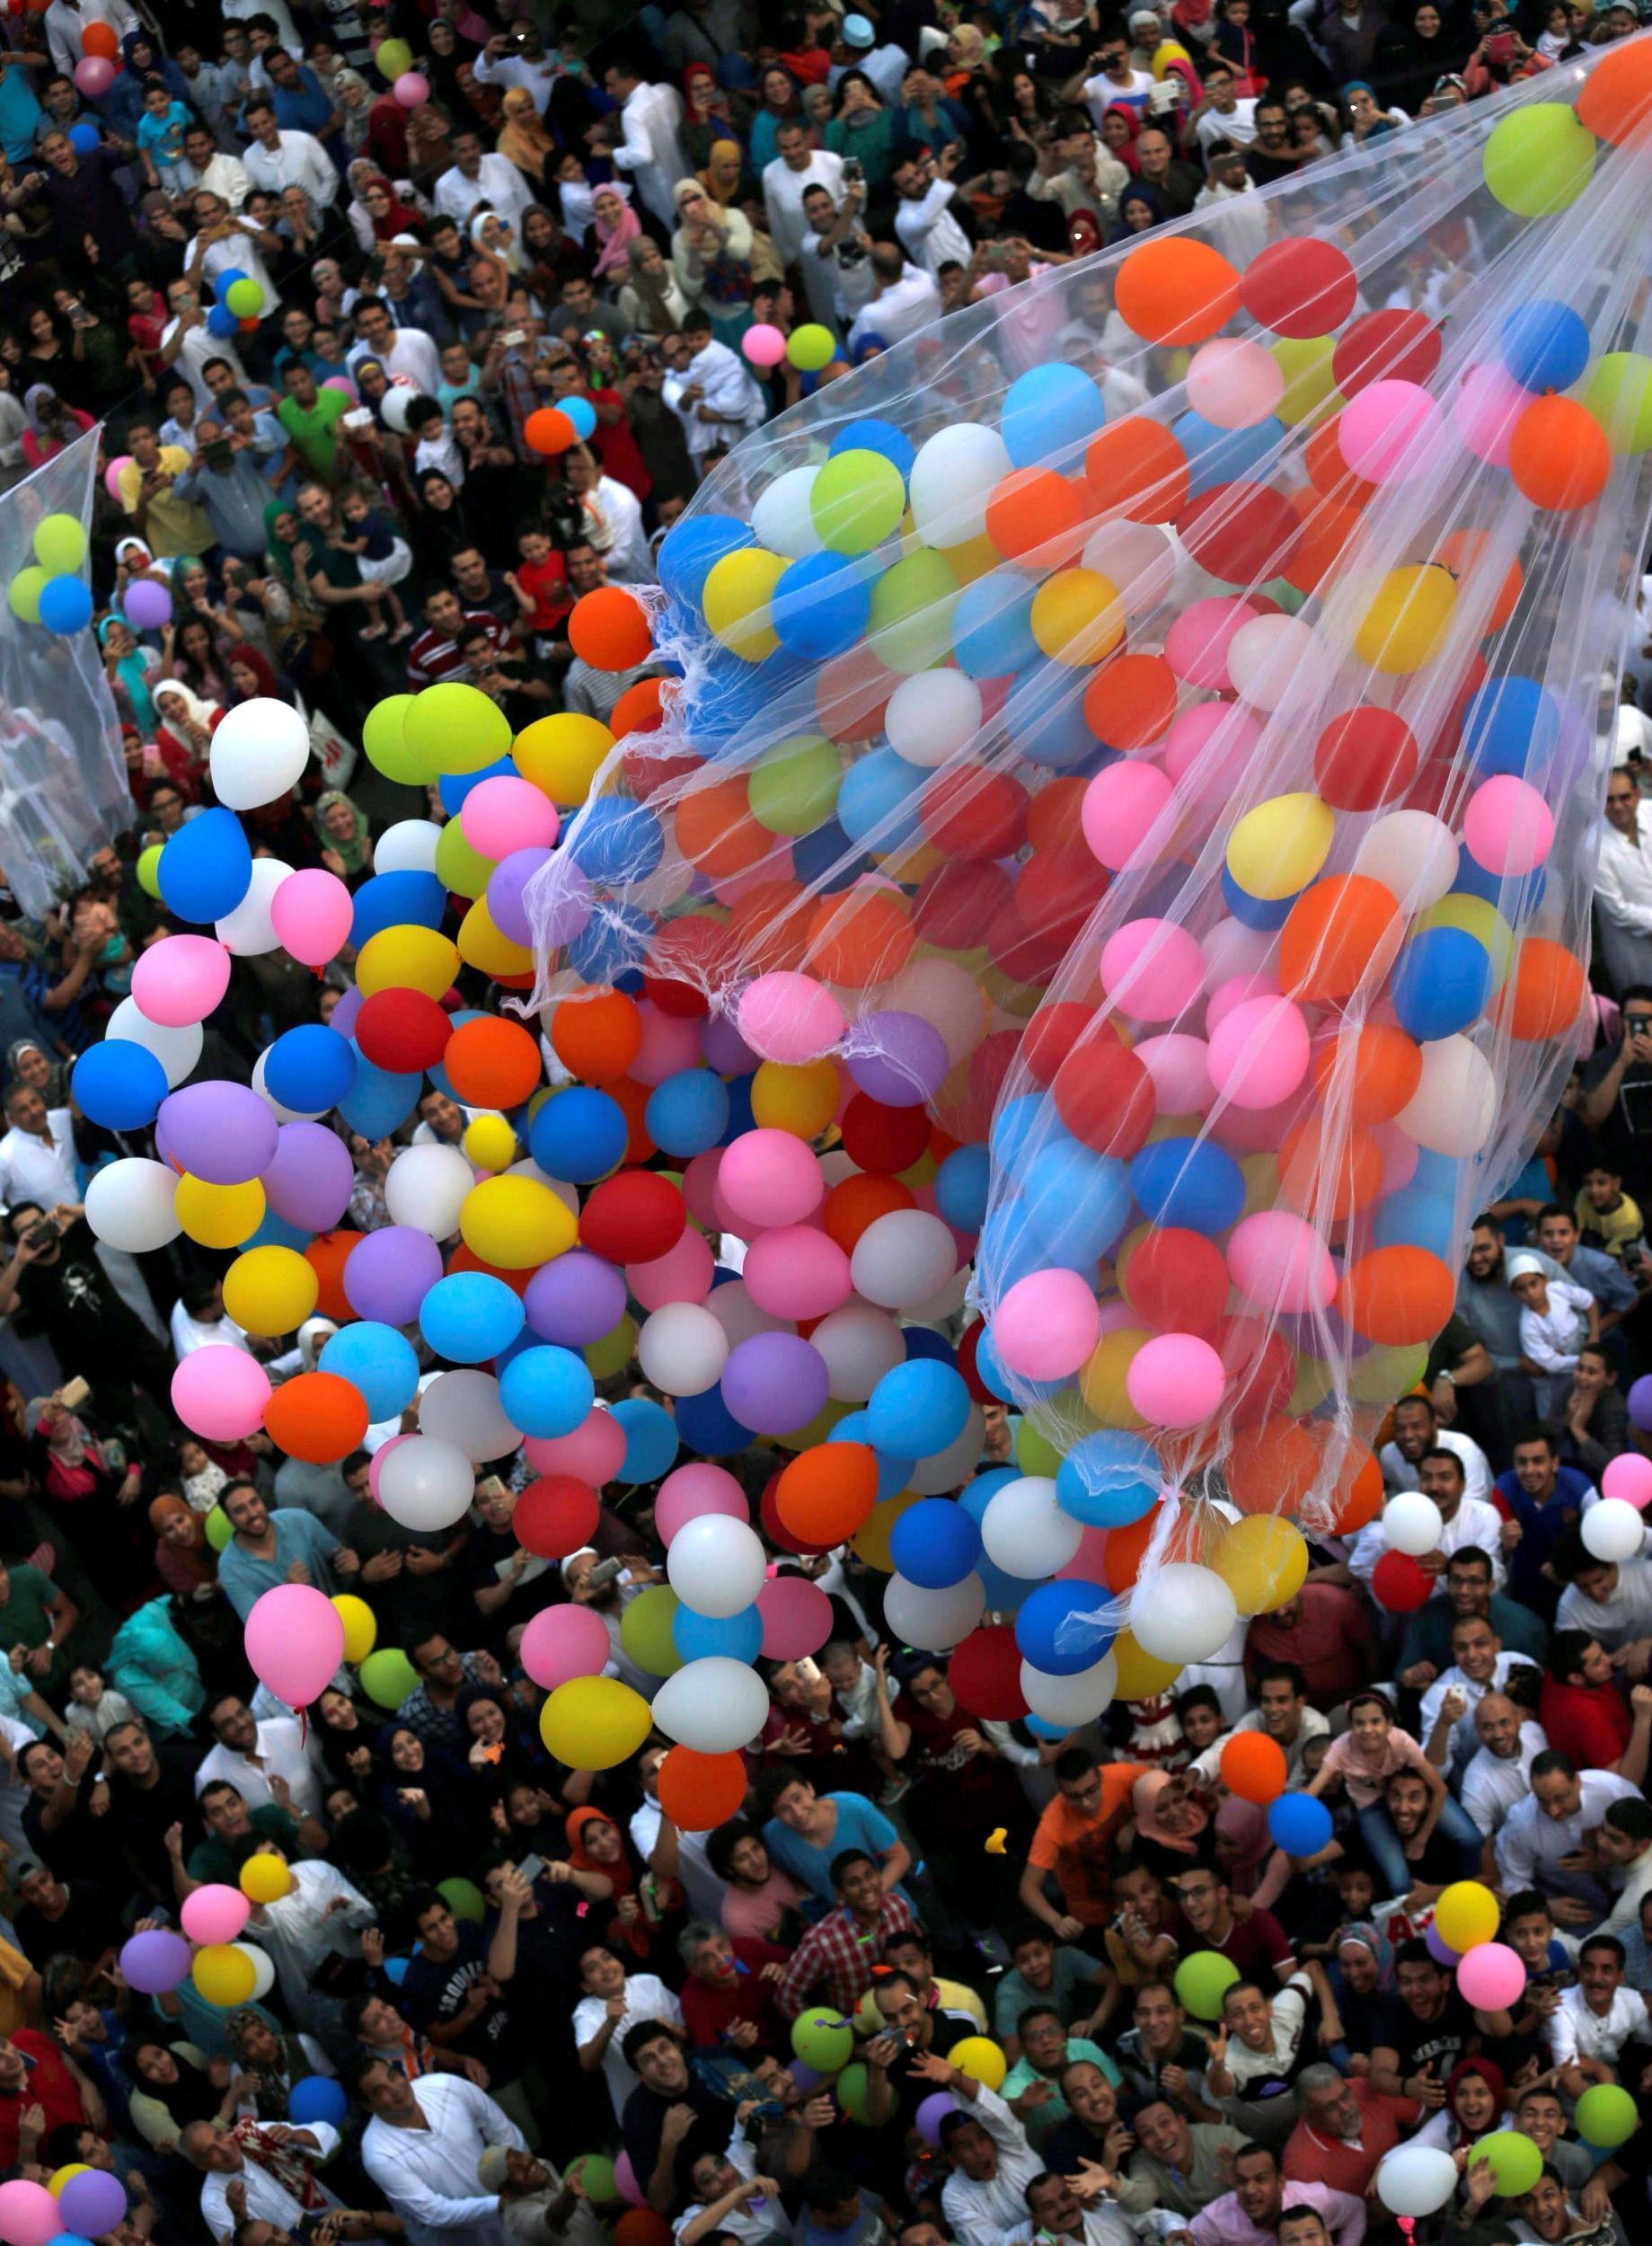 Egyptians try to catch balloons released after prayers, in a public park outside Cairo’s El-Seddik Mosque